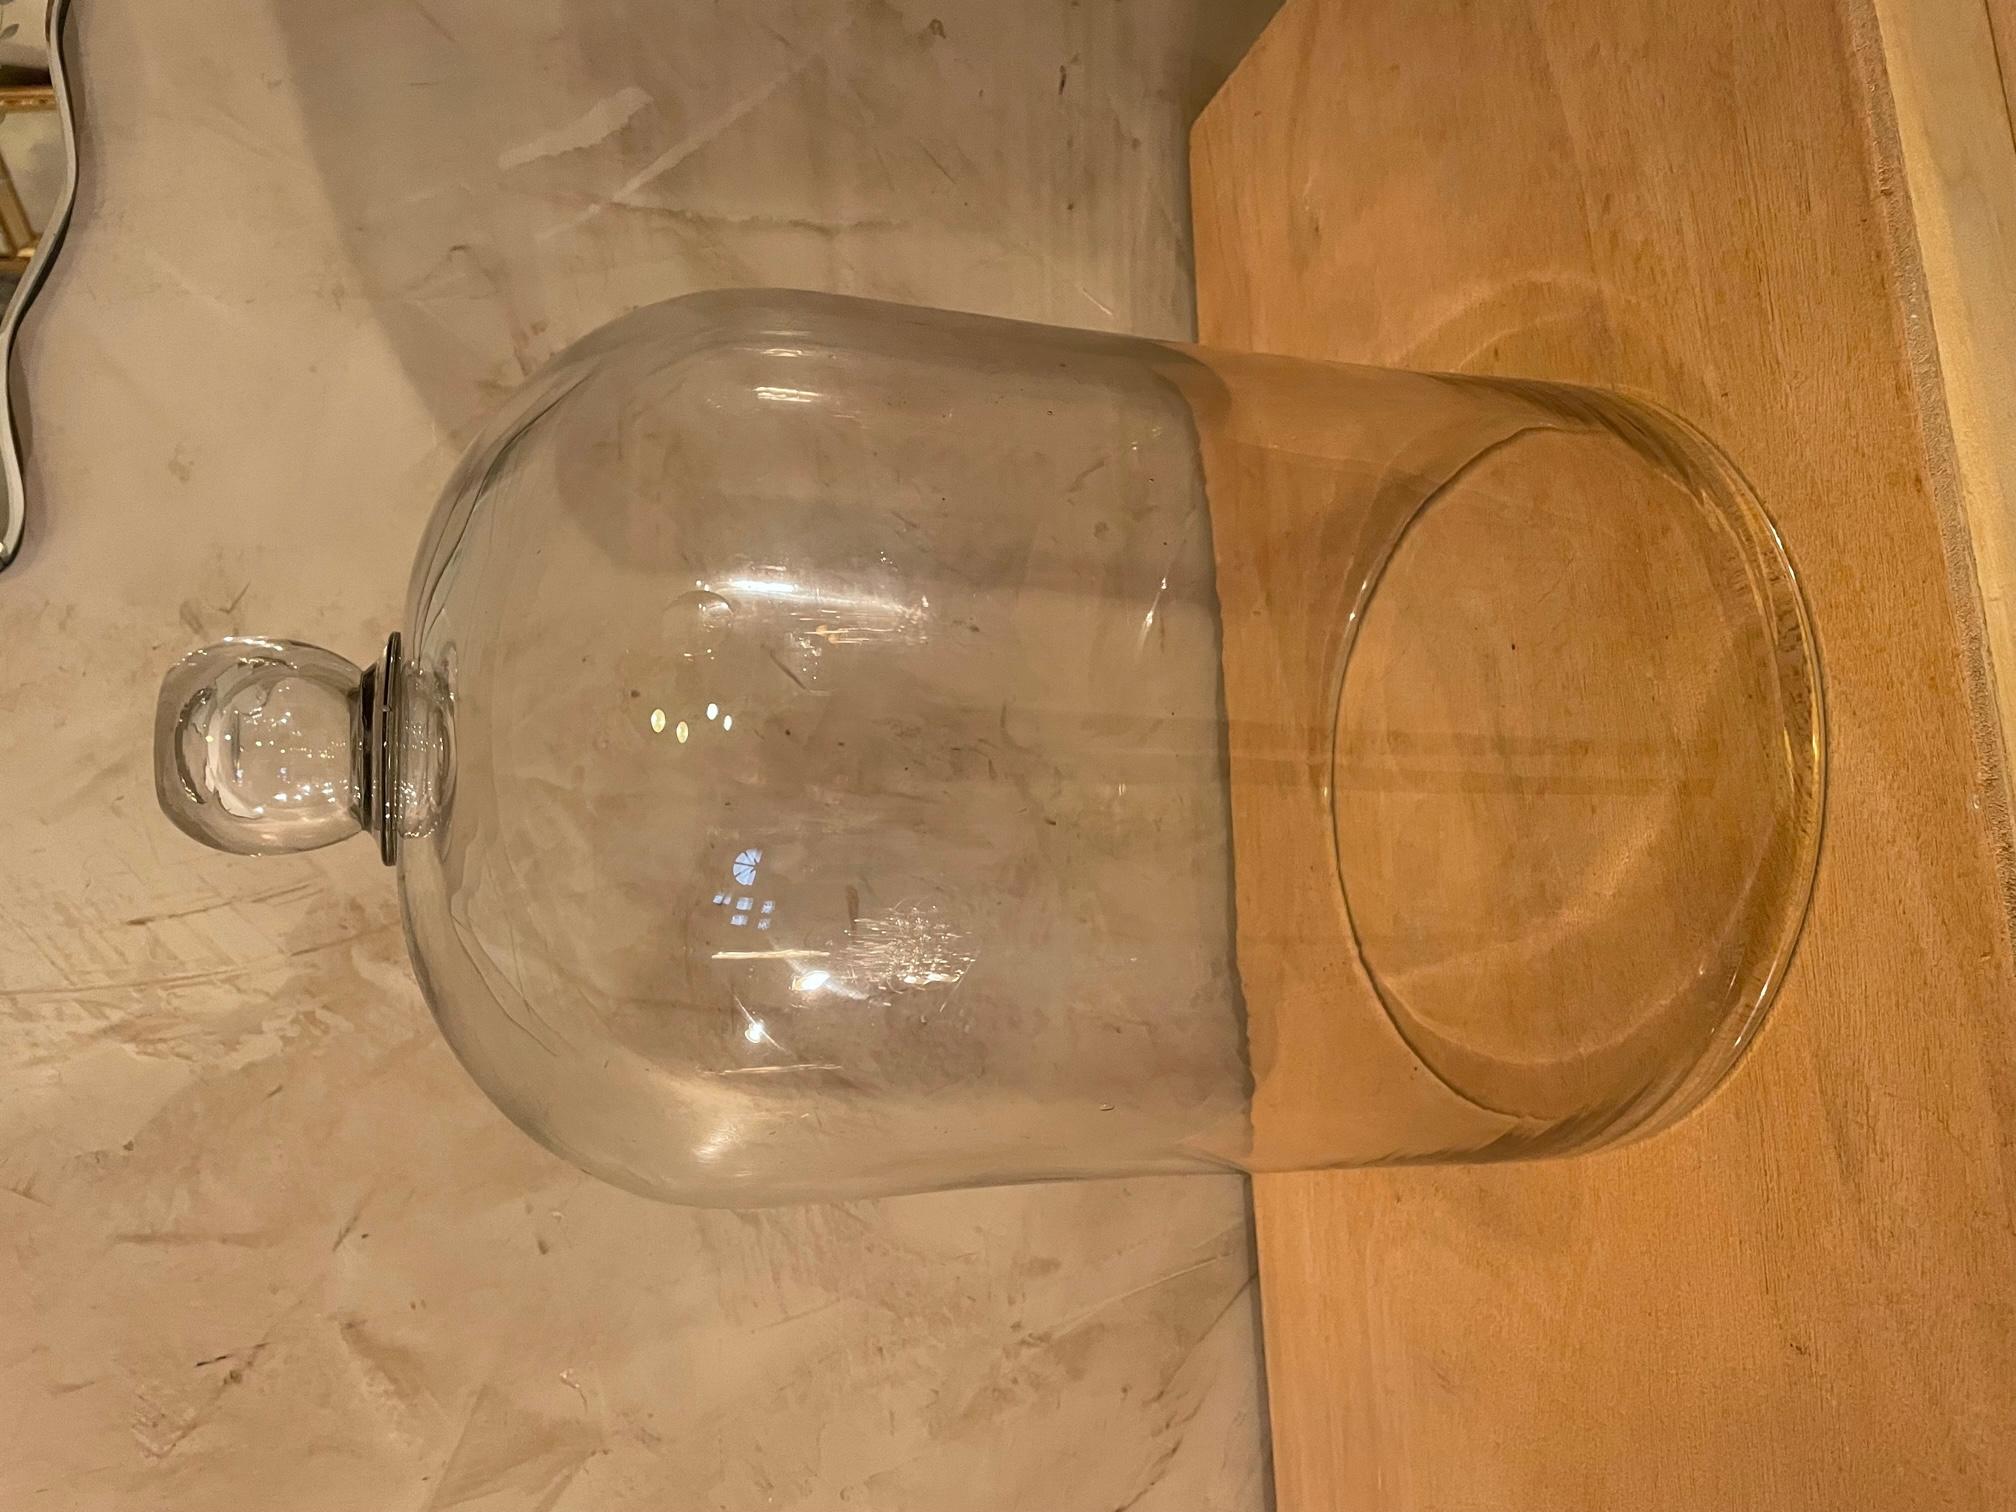 Very nice 20th century French blown glass bell from the 1900s. 
We can see the bubbles in the glass. Thick glass. 
On the top it has a glass sphere that allows you to raise the bell easily.
Very nice quality. Can be used as a decoration or to